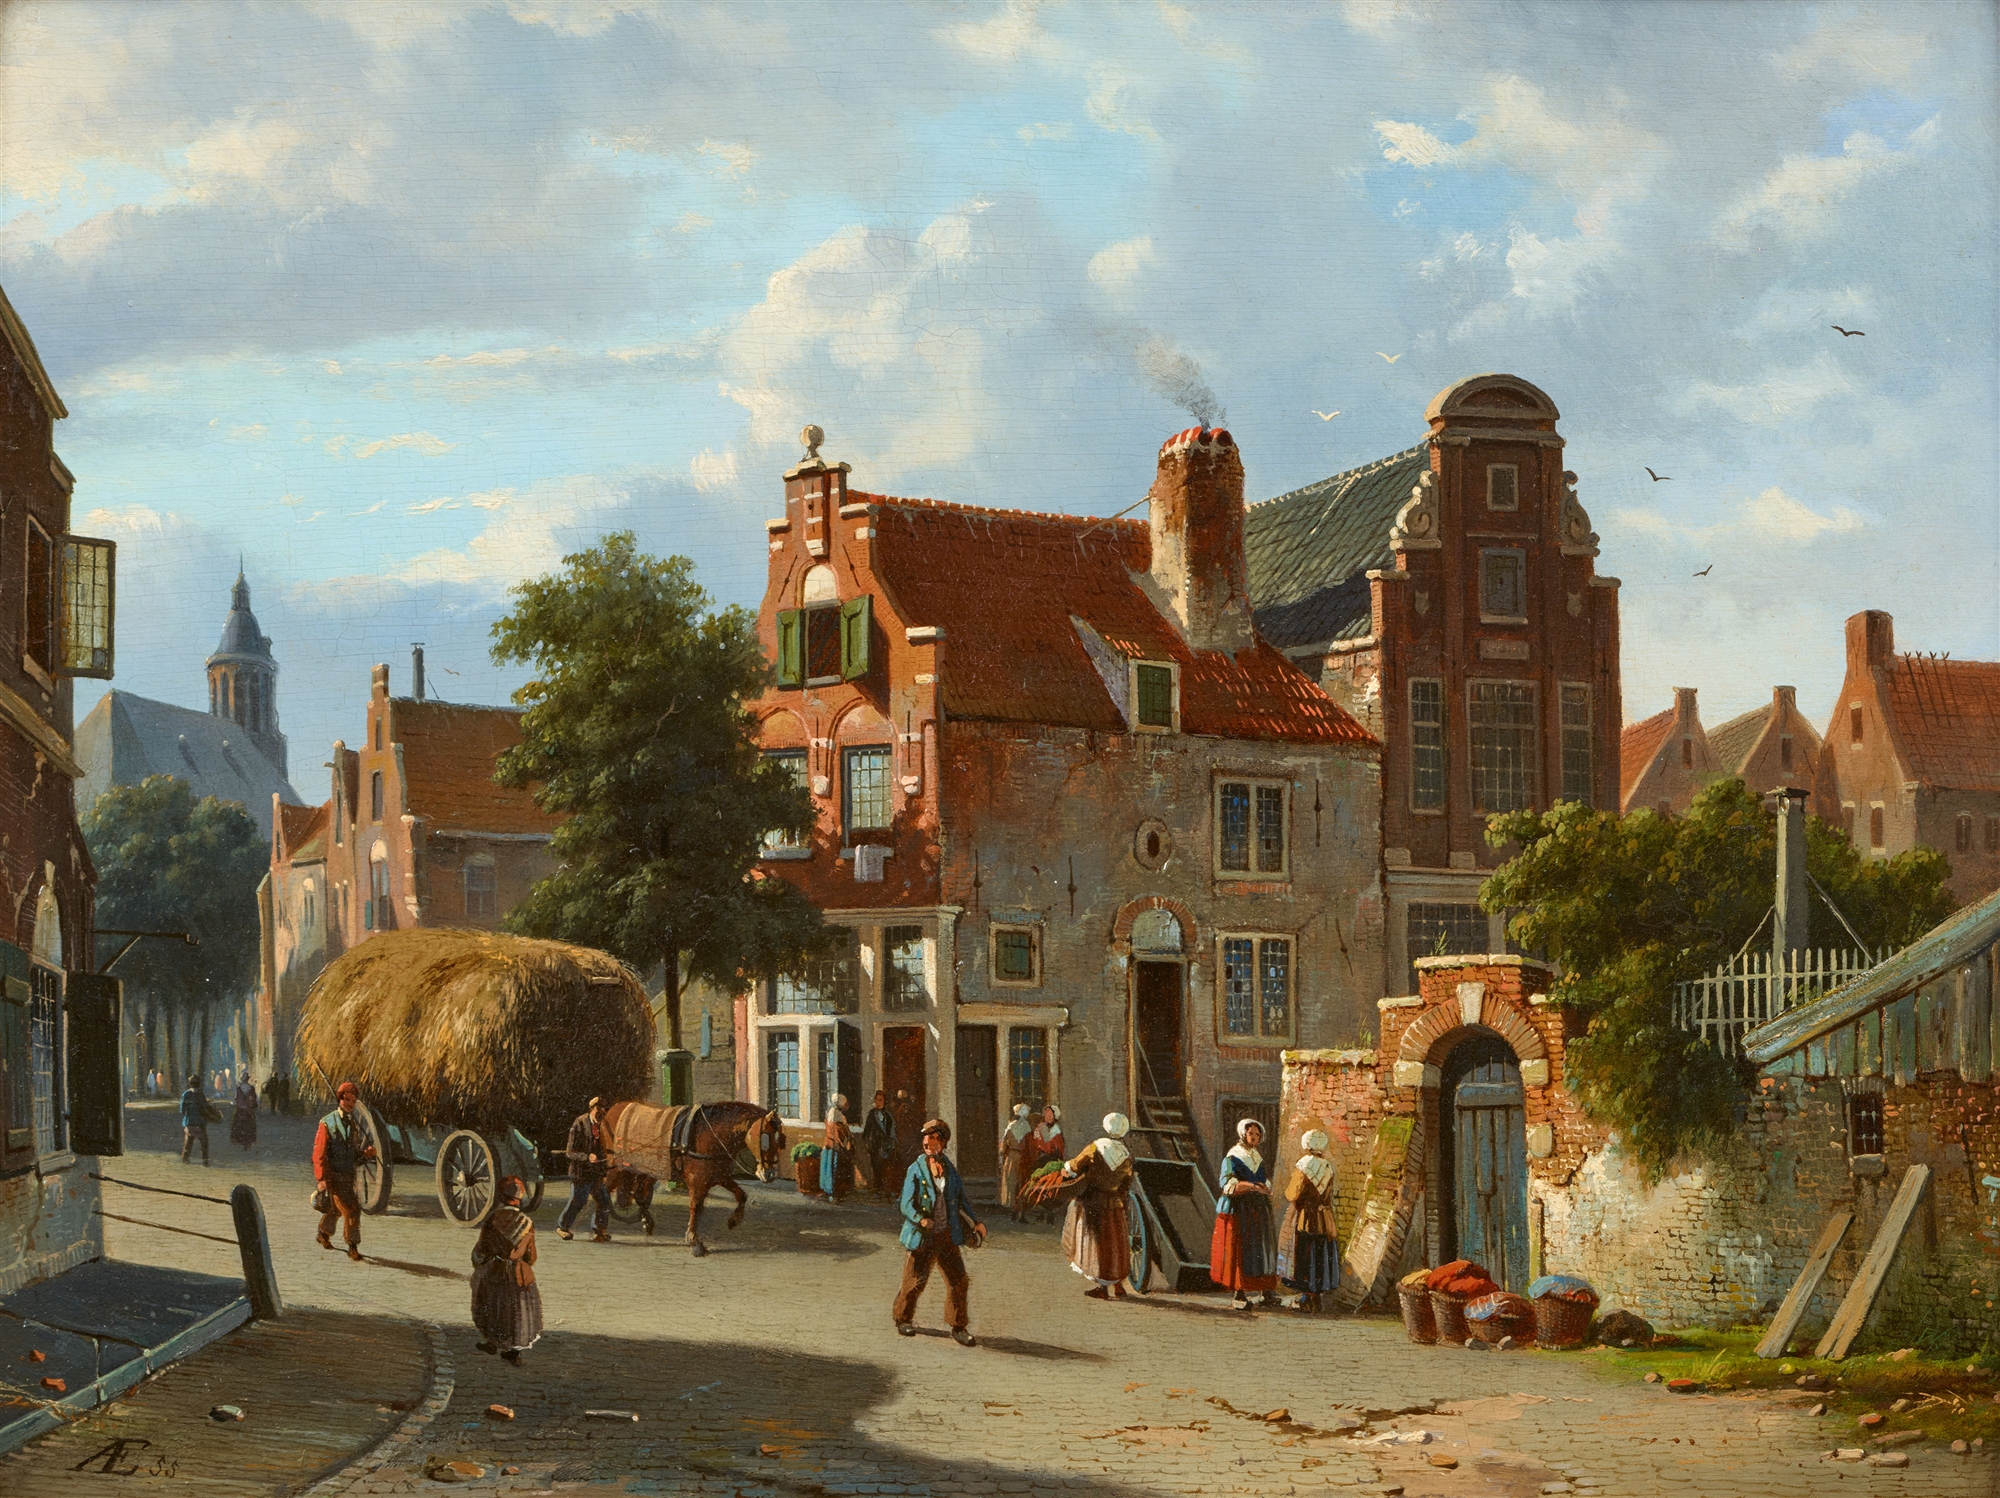 Adrianus Eversen, Pair of paintings: Summer View of a Town with a Haywain and Figures, Dutch Canal S